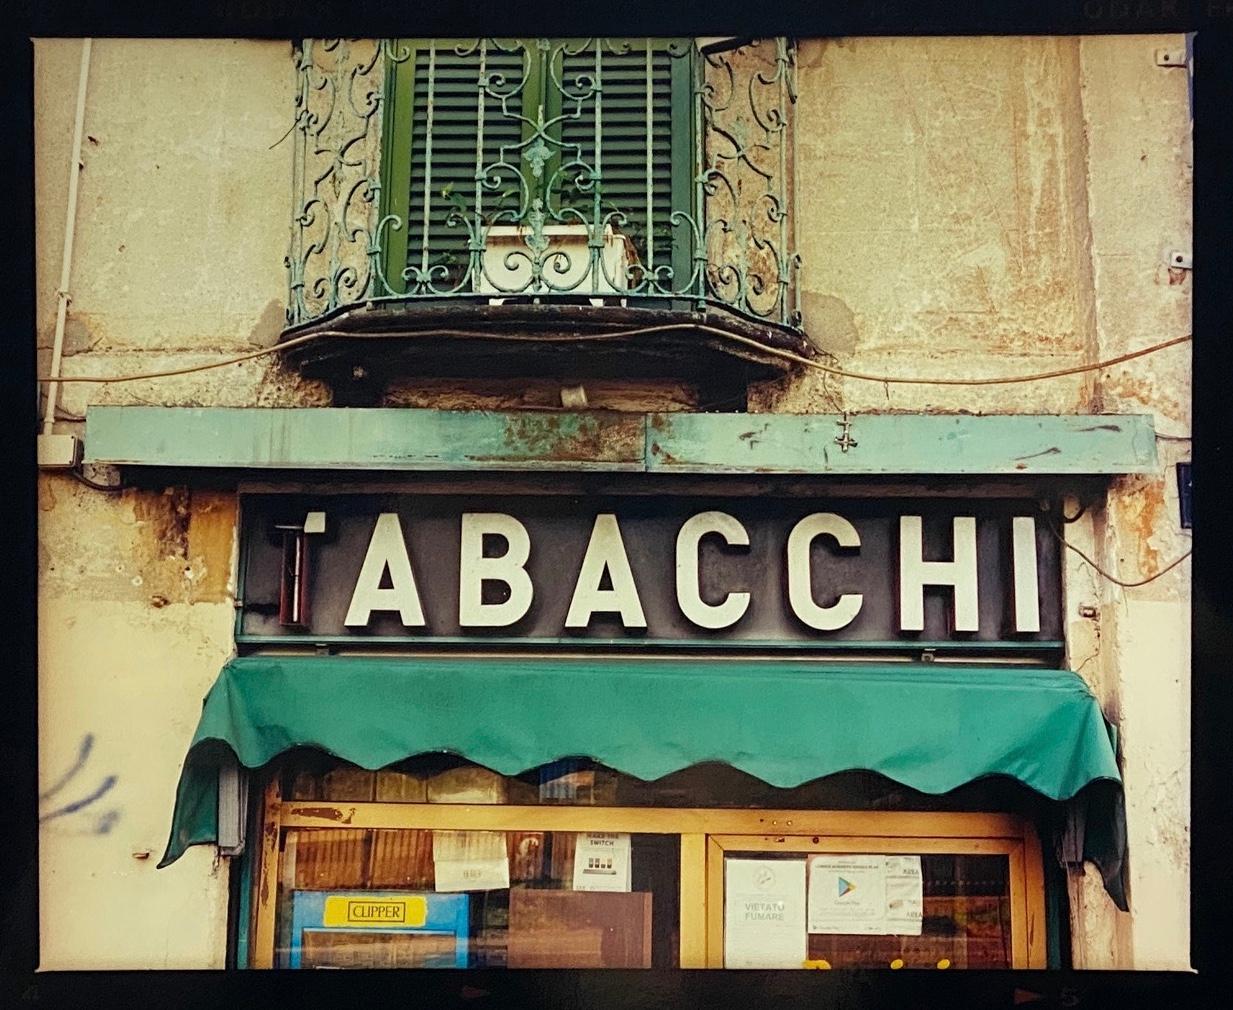 Tabacchi Sign, from Richard Heeps series, 'A Short History of Milan' which began in November 2018 for a special project featuring at the Affordable Art Fair Milan 2019 and the series is ongoing.
There is a reoccurring linear, structural theme